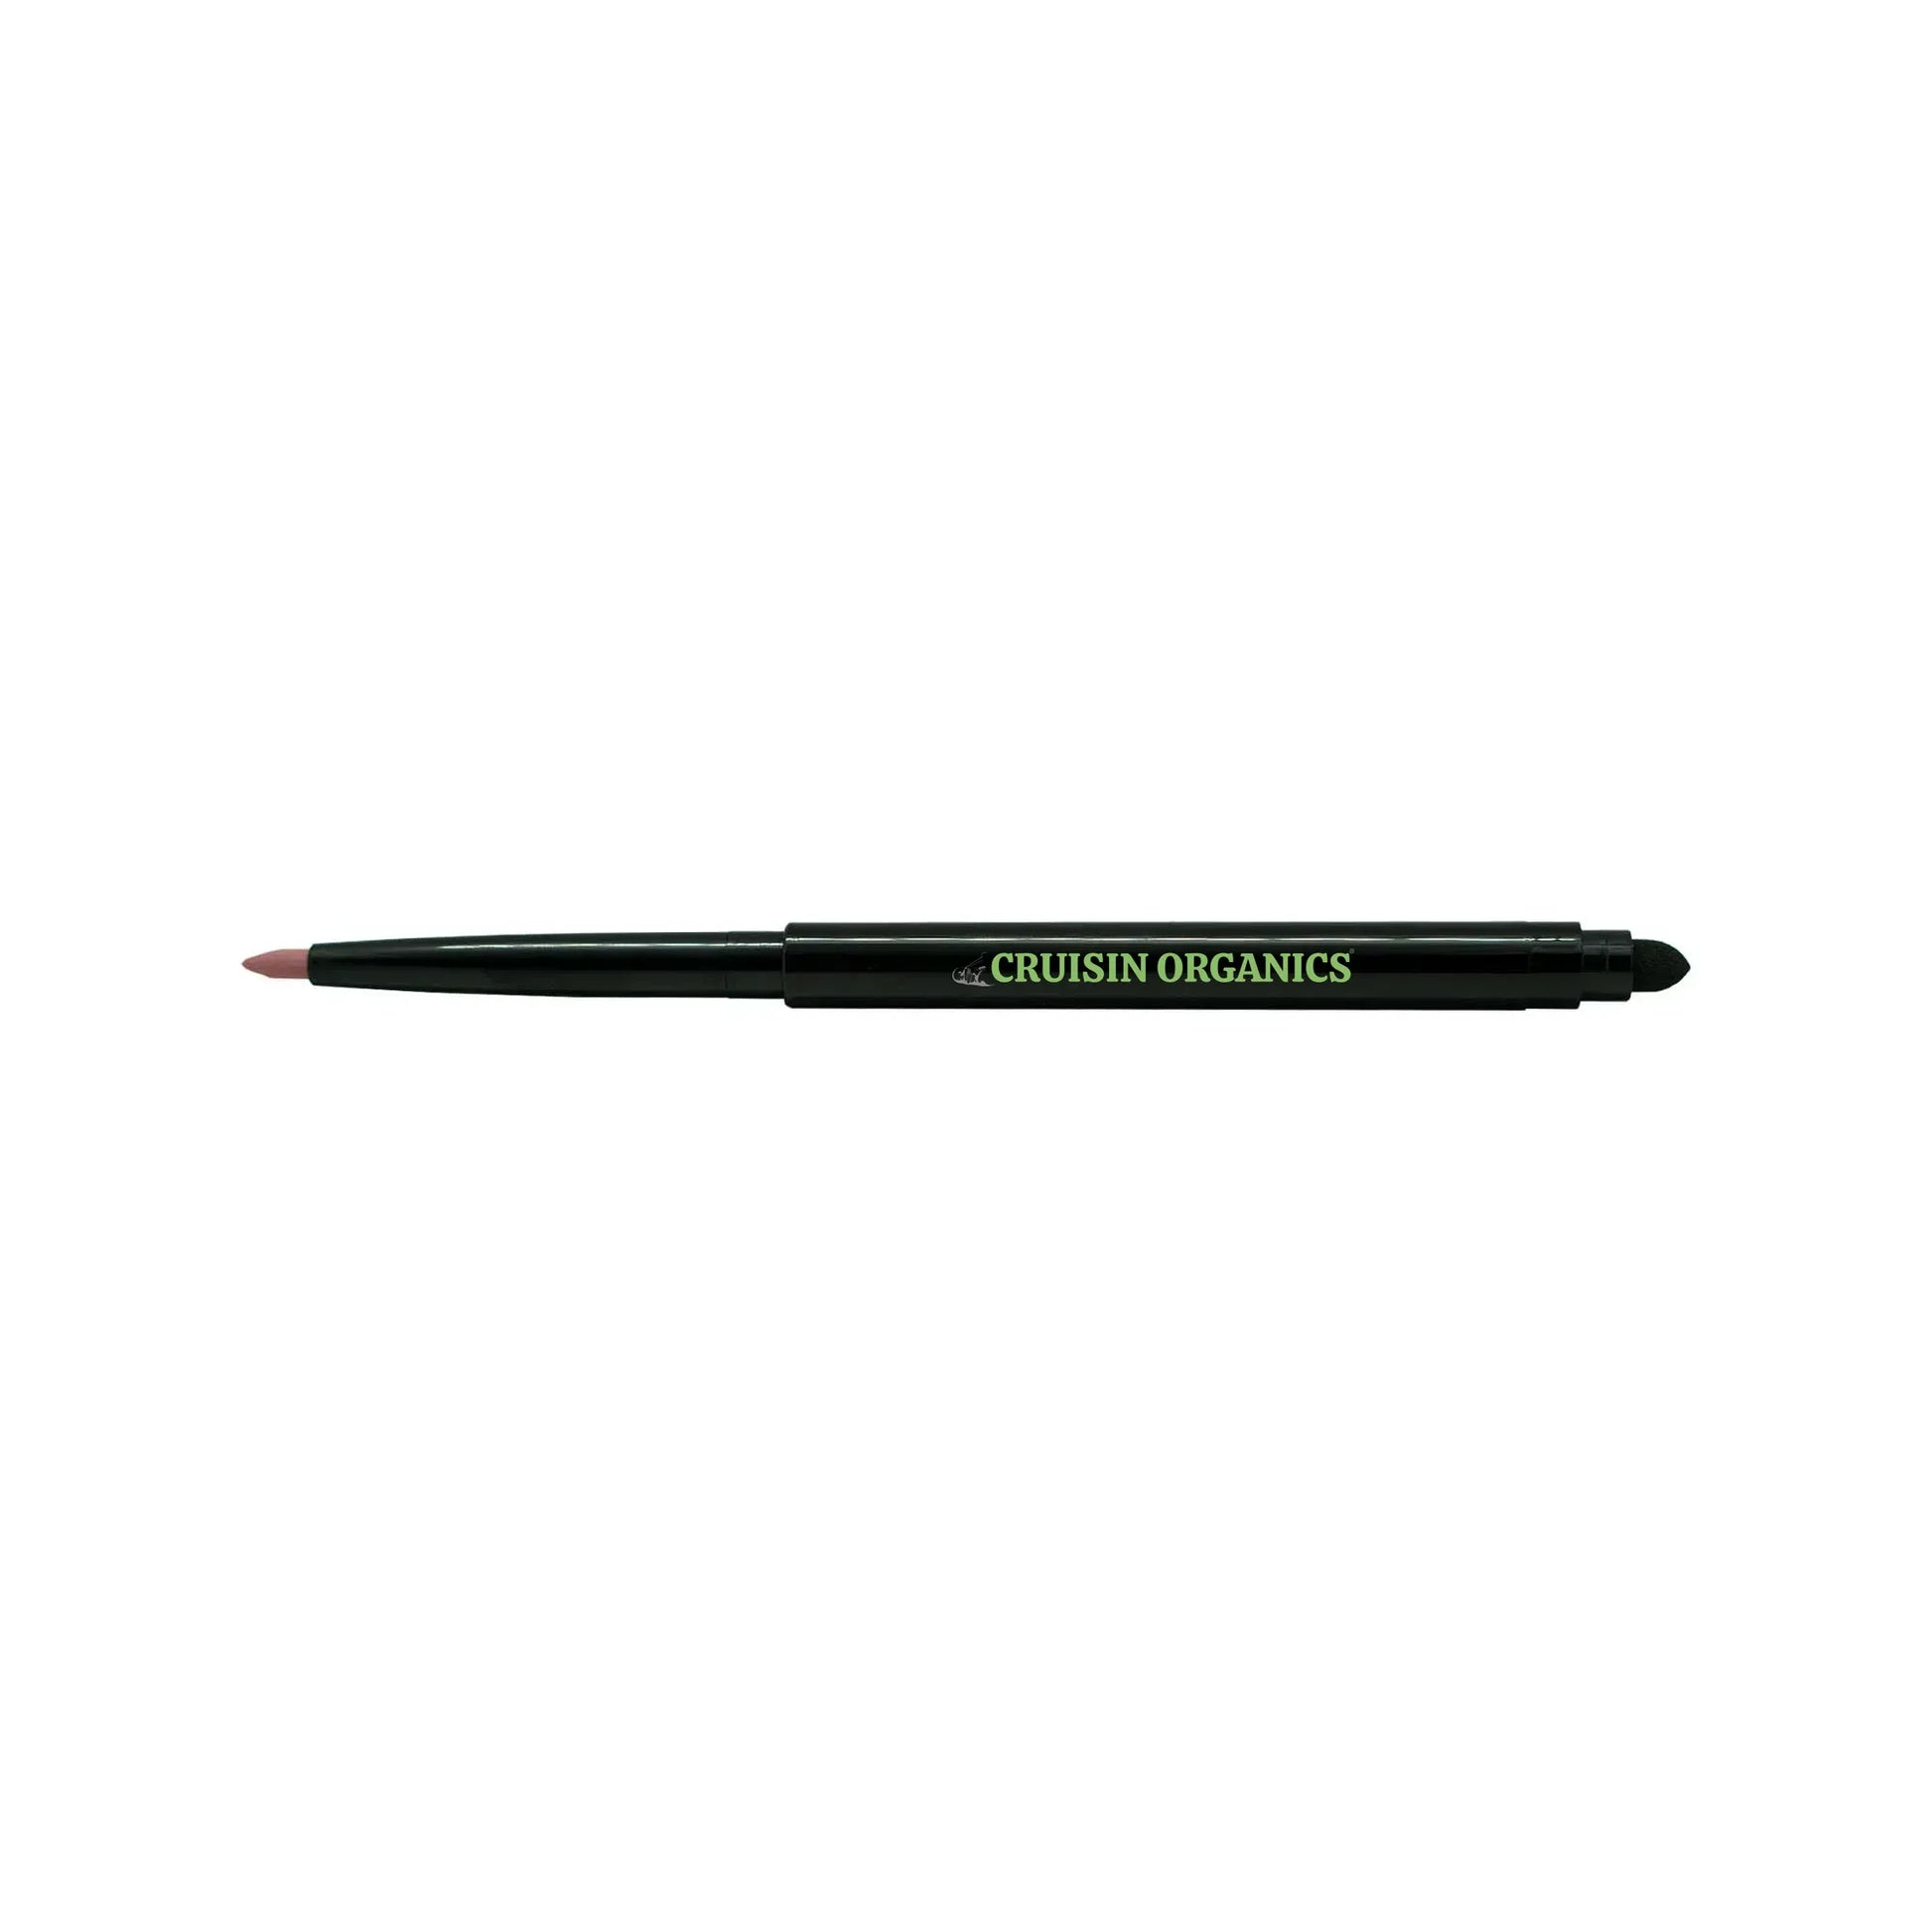 Cruisin Organics Retractable Lip Liner. No need for a pencil sharpener when you're on the go. Just twist up the liner and apply around your Cruisin Organics Lipstick for a fuller, spicier lip. Perfect for travel and everyday use.